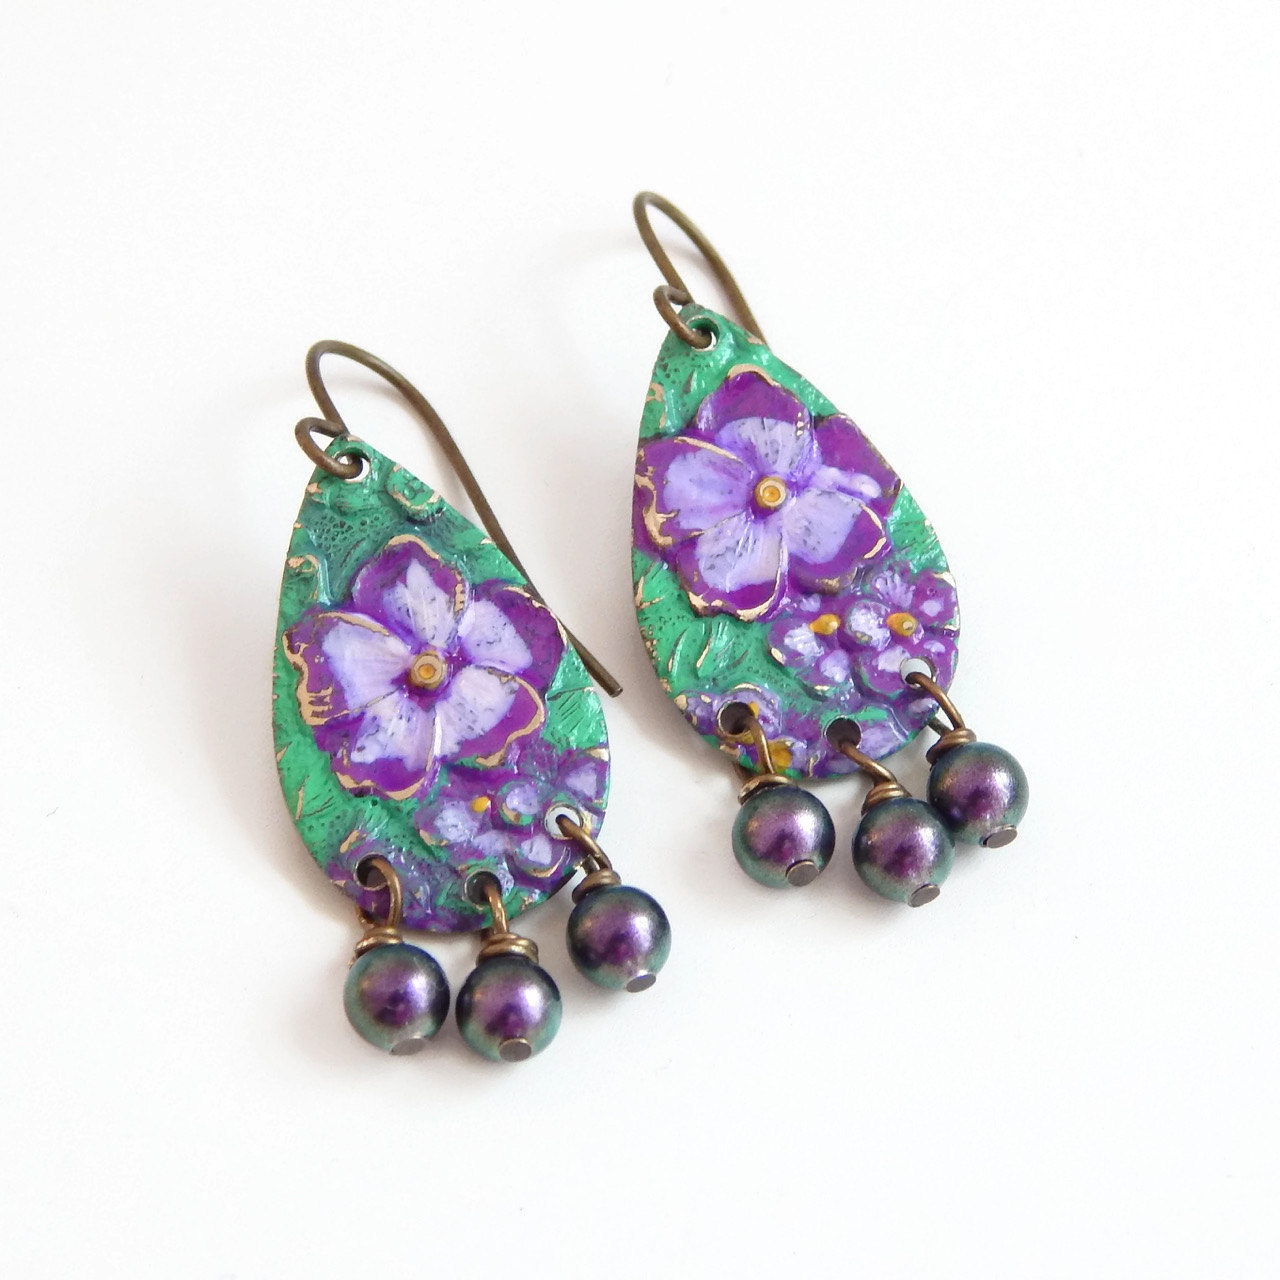 Floral Hand Painted Earrings from LoveYourBling,